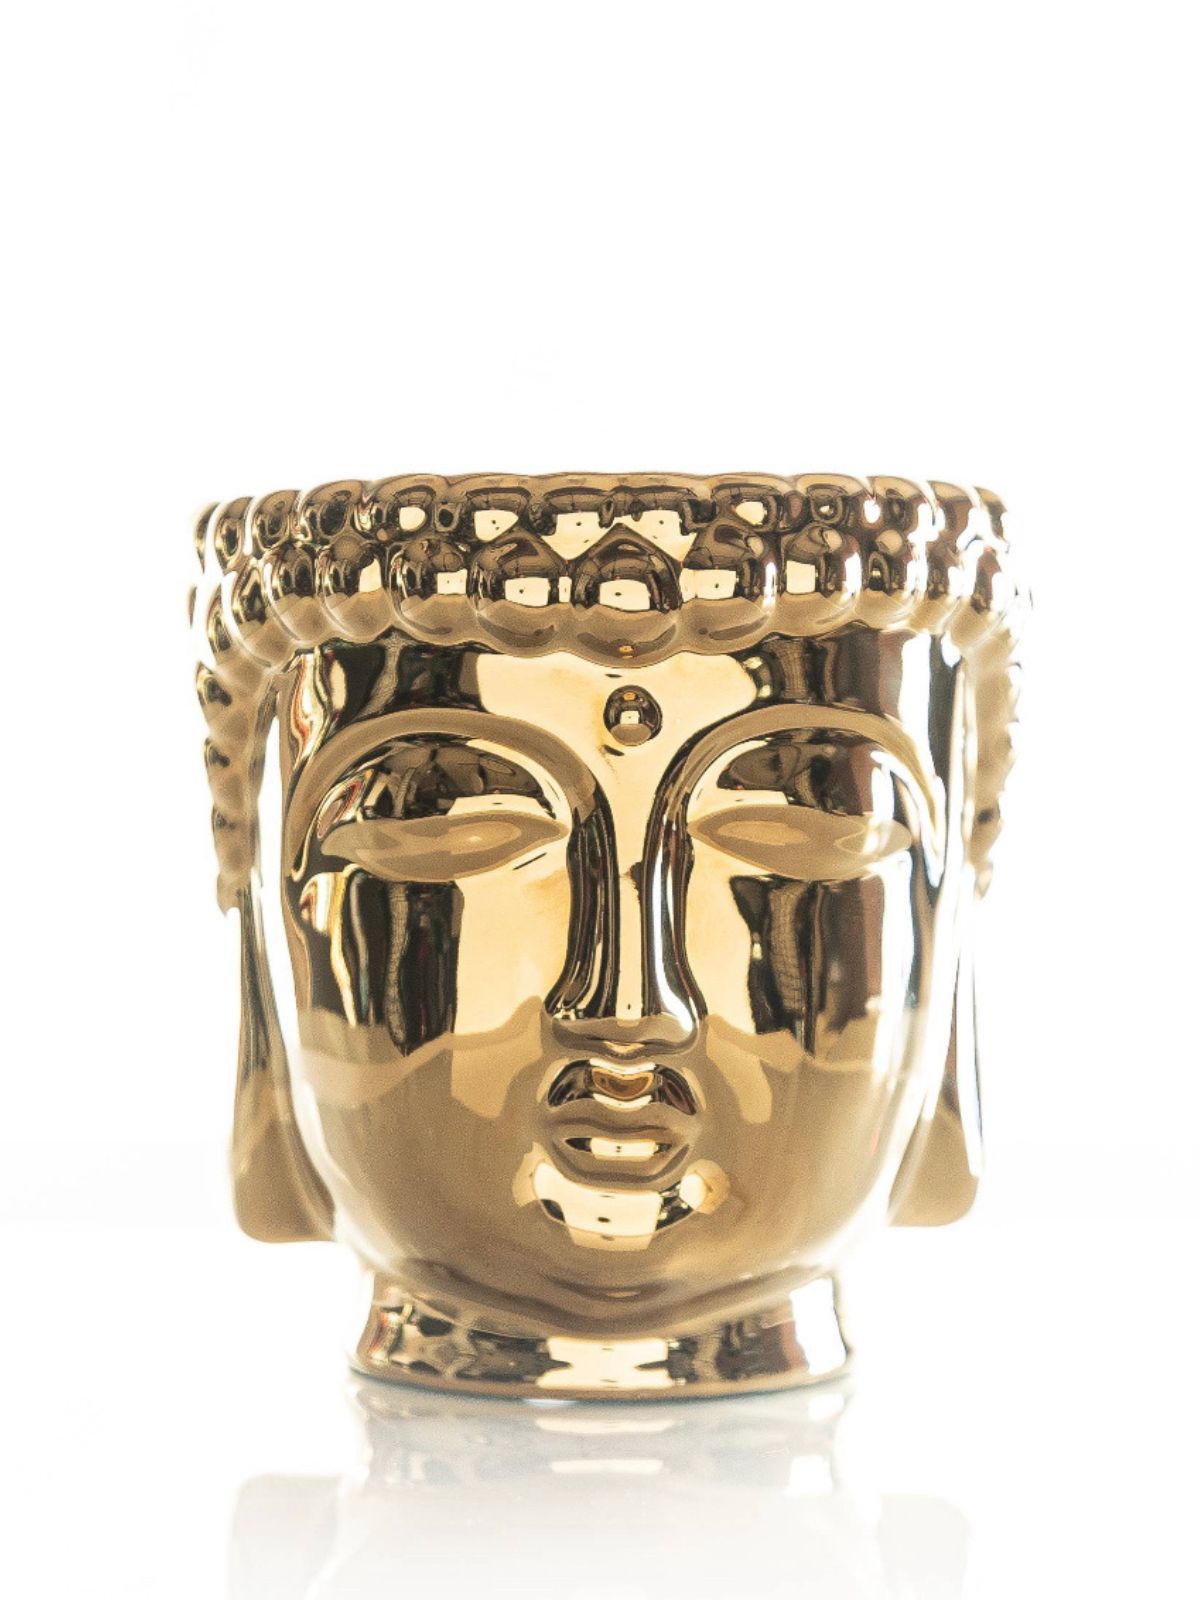 This Metallic Buddha scented candle is hand-sculpted and hand-poured in the USA with only the finest essential oils. 